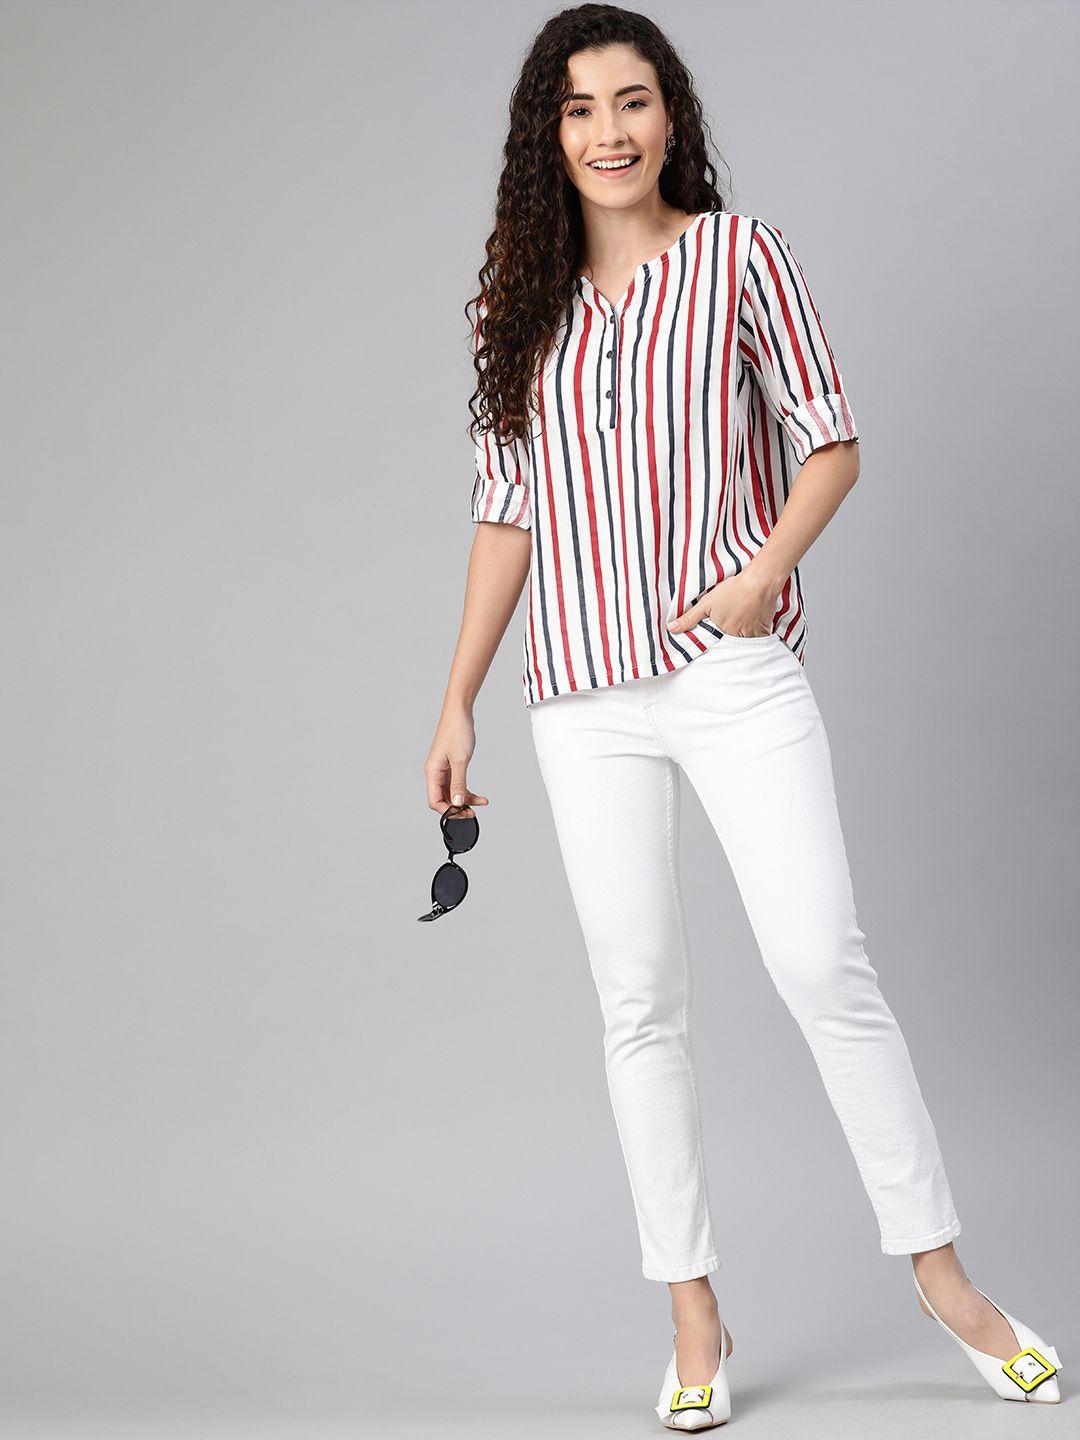 here&now-white-striped-shirt-style-top